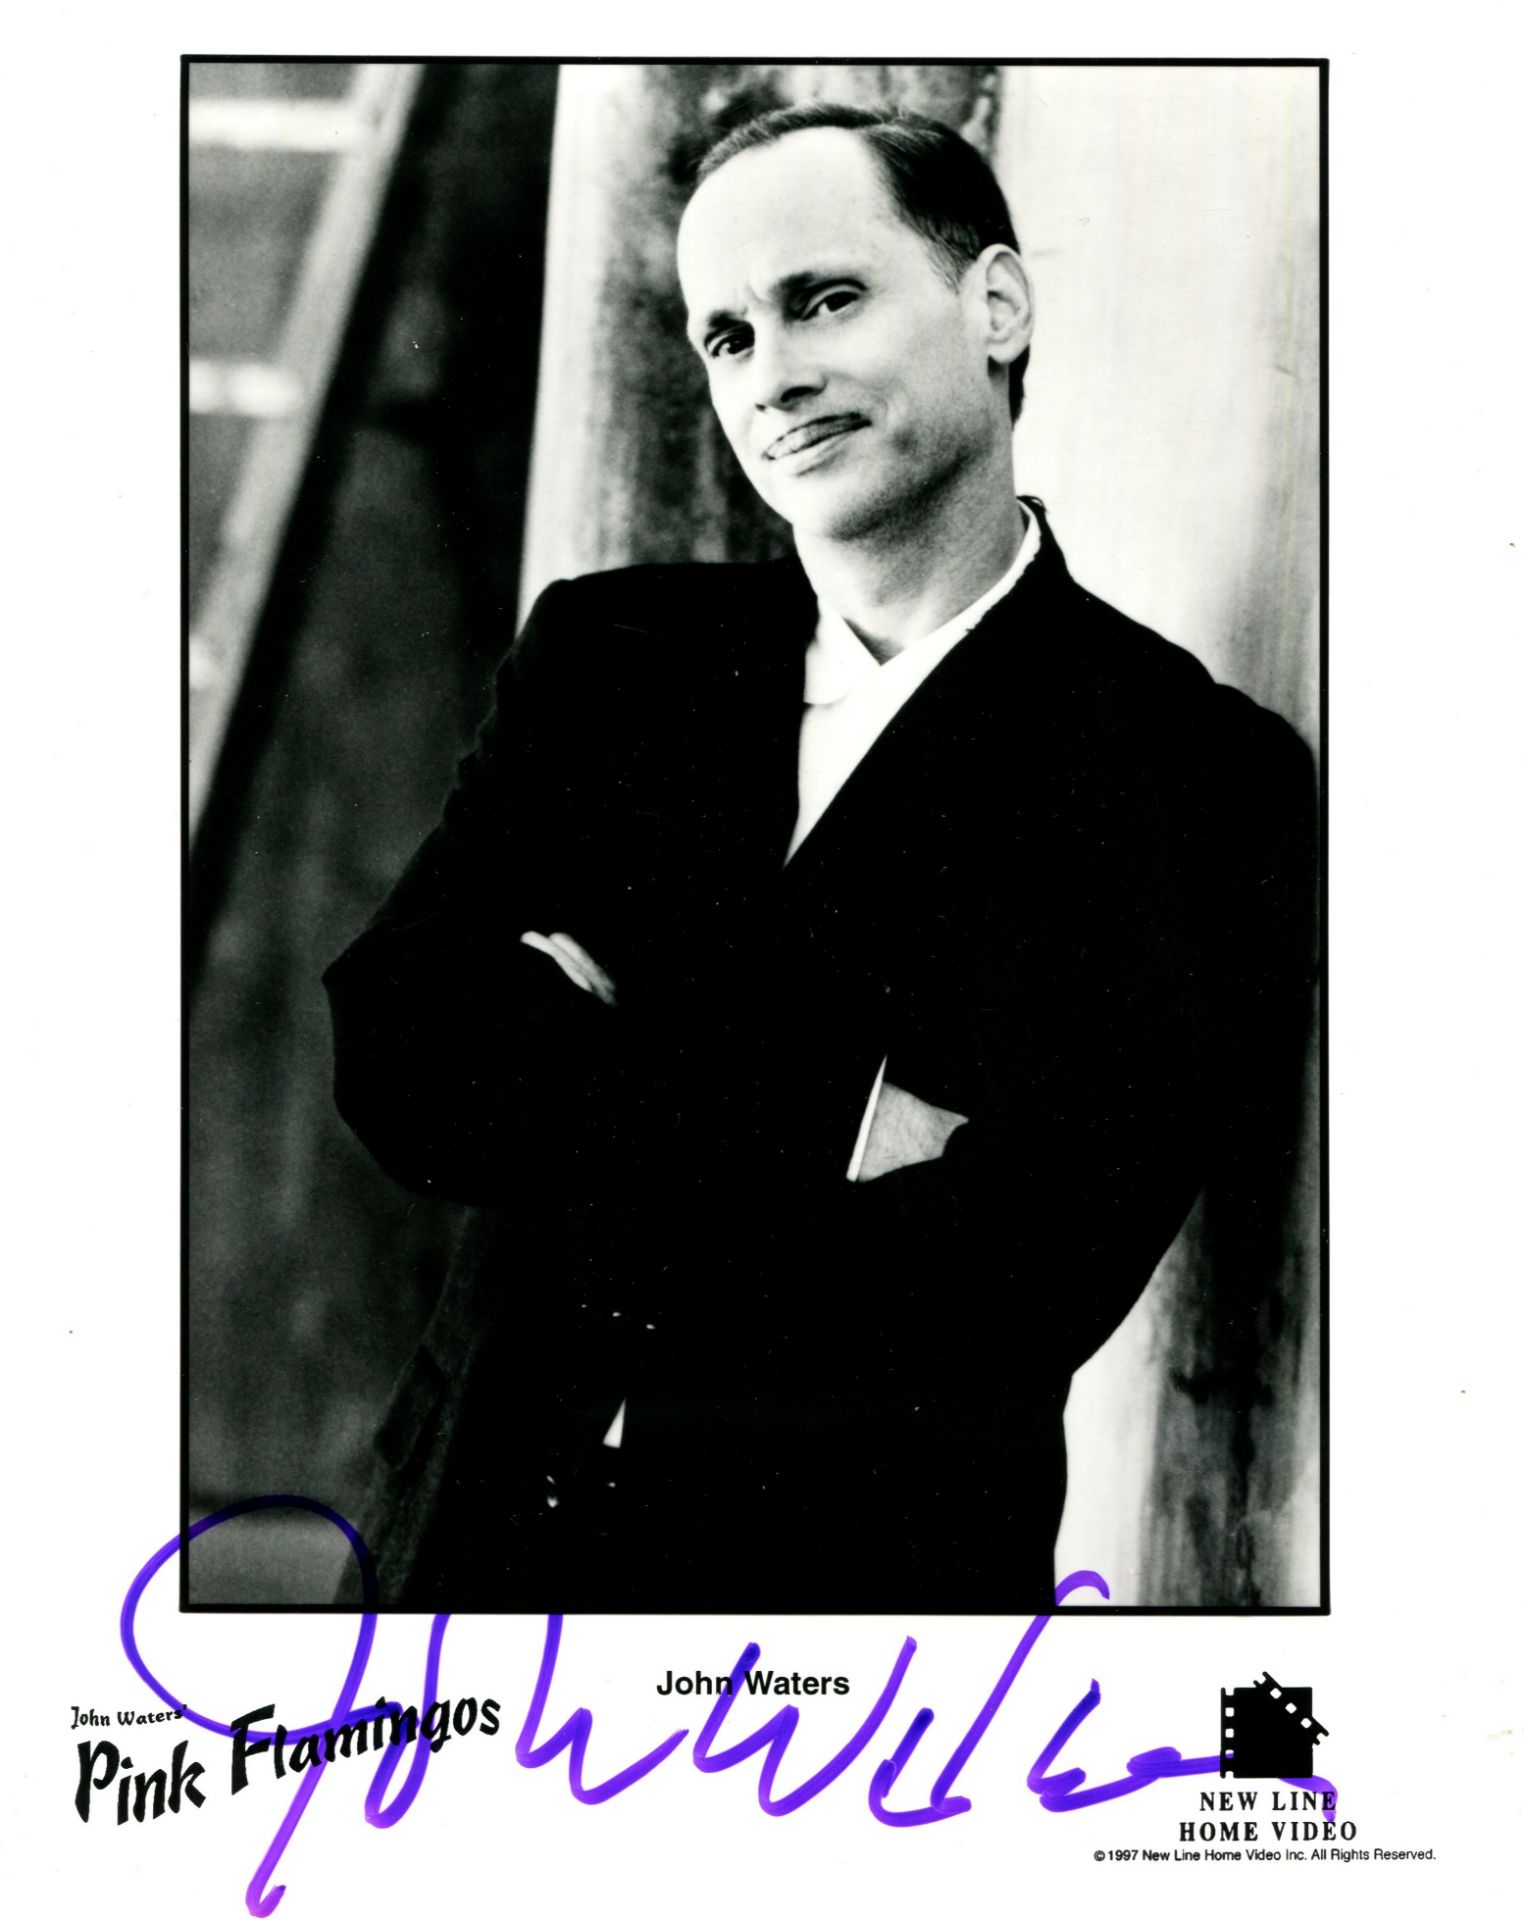 FILM DIRECTORS: Selection of signed 8 x 10 photographs by various film directors and producers